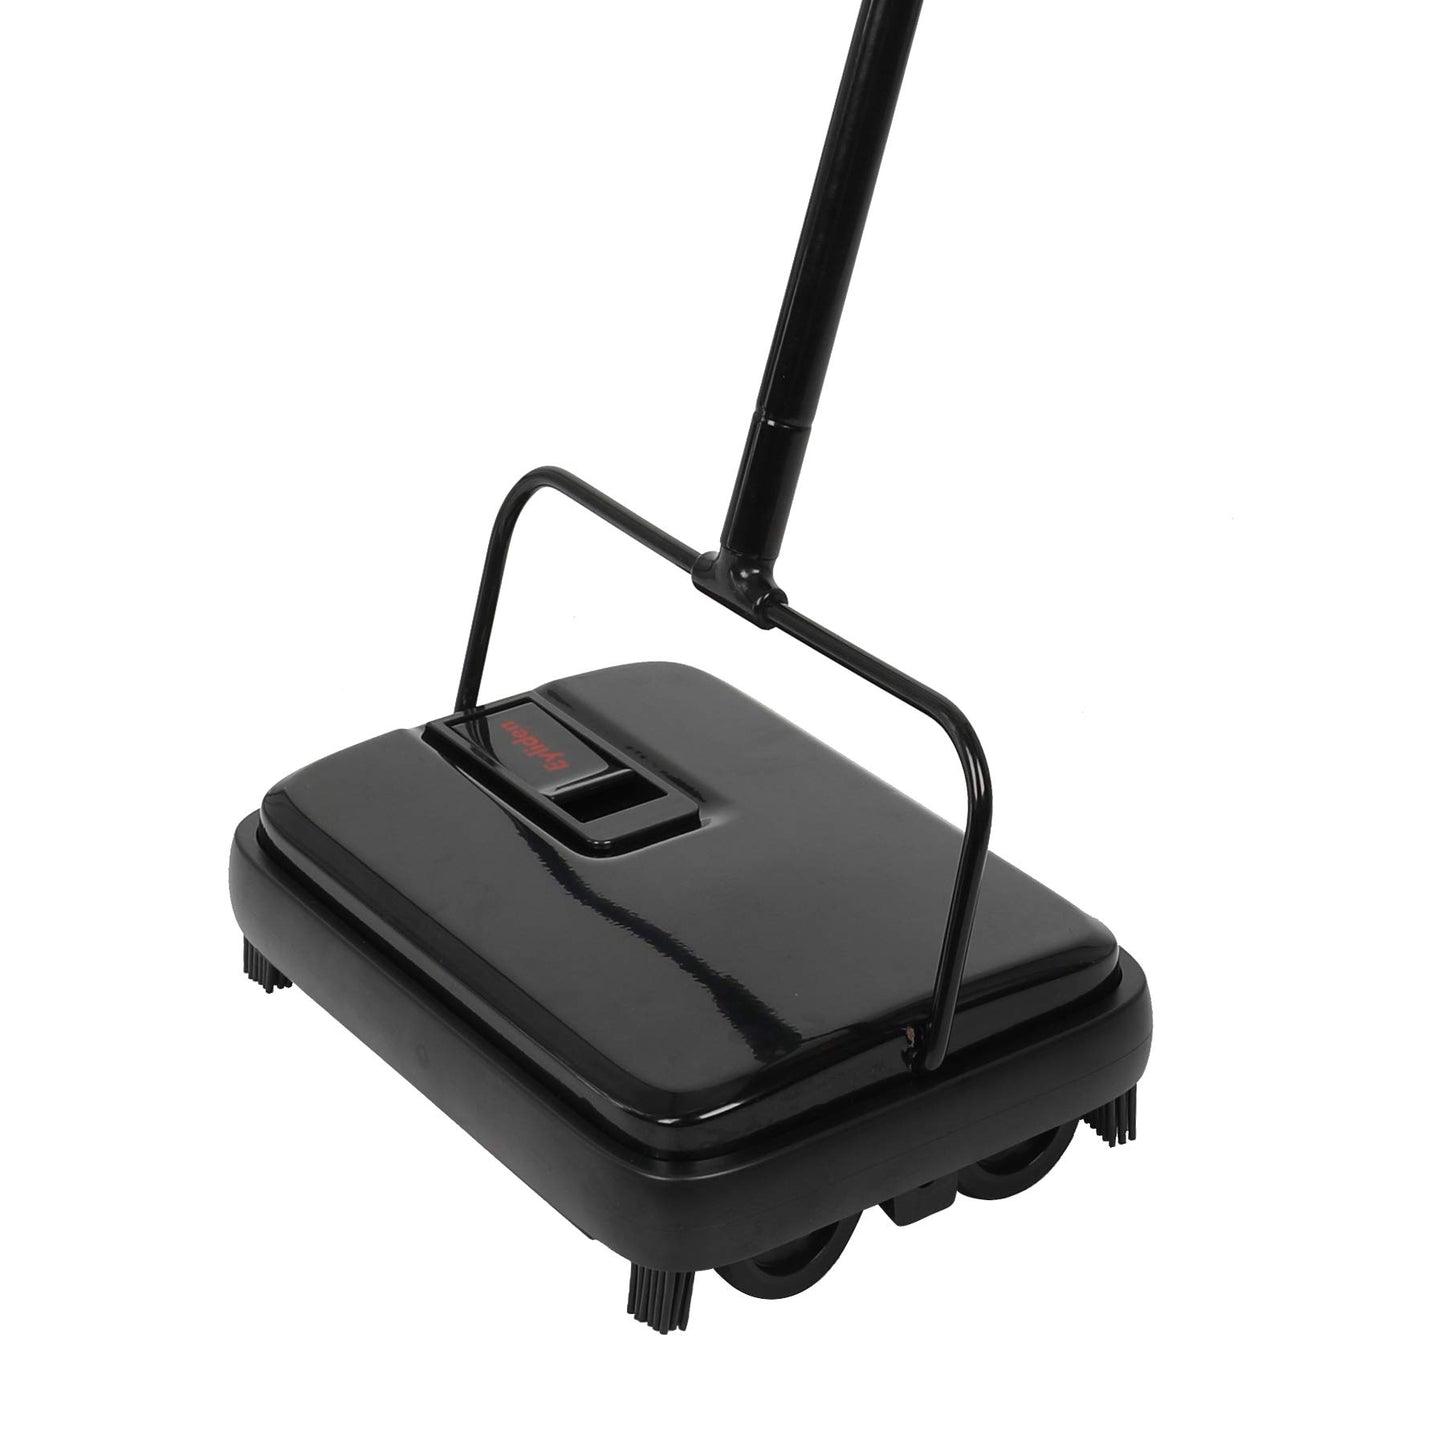 Eyliden Carpet Sweeper, Mini Size Lightweight Hand Push Carpet Sweepers - No Noise, Non-Electric - Easy Manual Sweeping, Automatic Compact Broom Only for Carpet Cleaning (Mint，Black，Red，White)